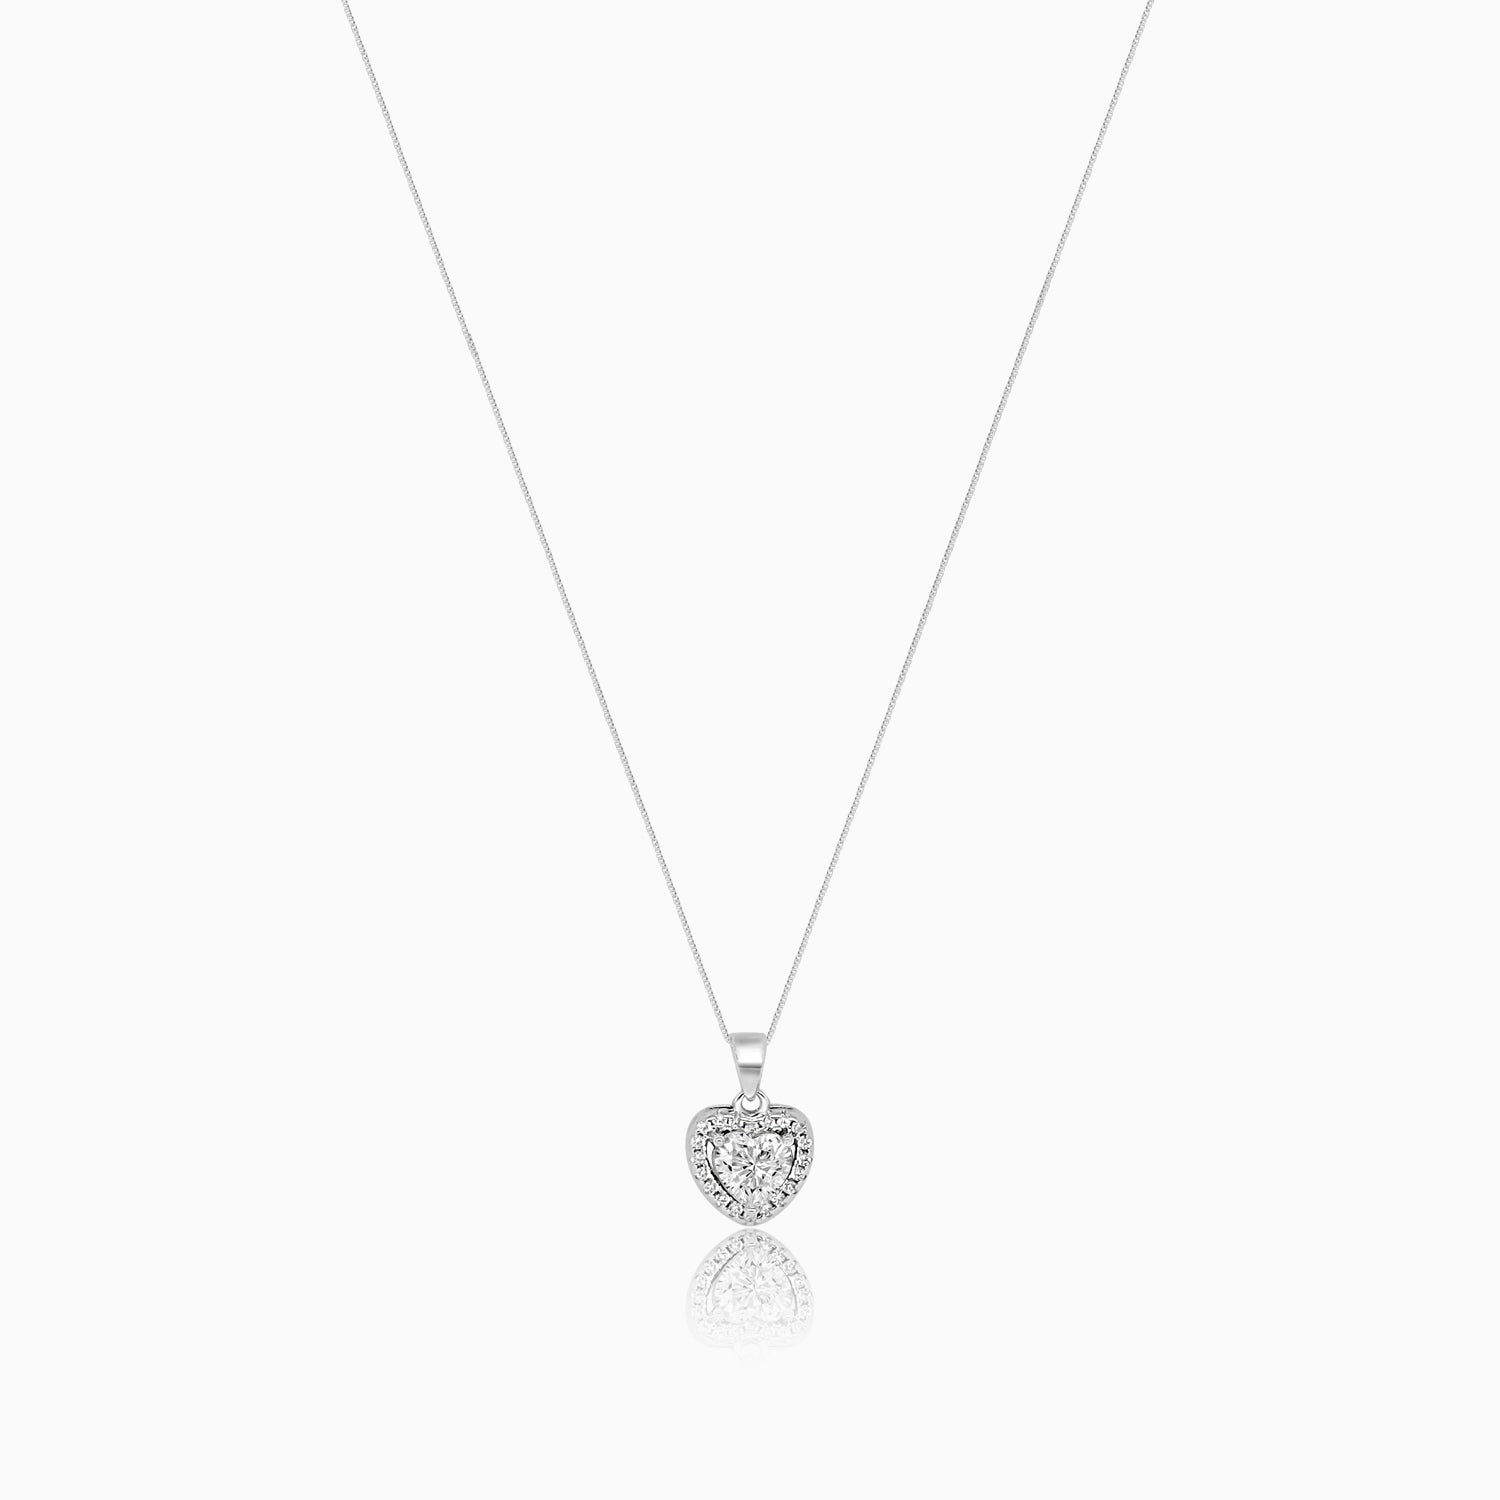 Silver Sparkling Awe Heart Solitaire Pendant